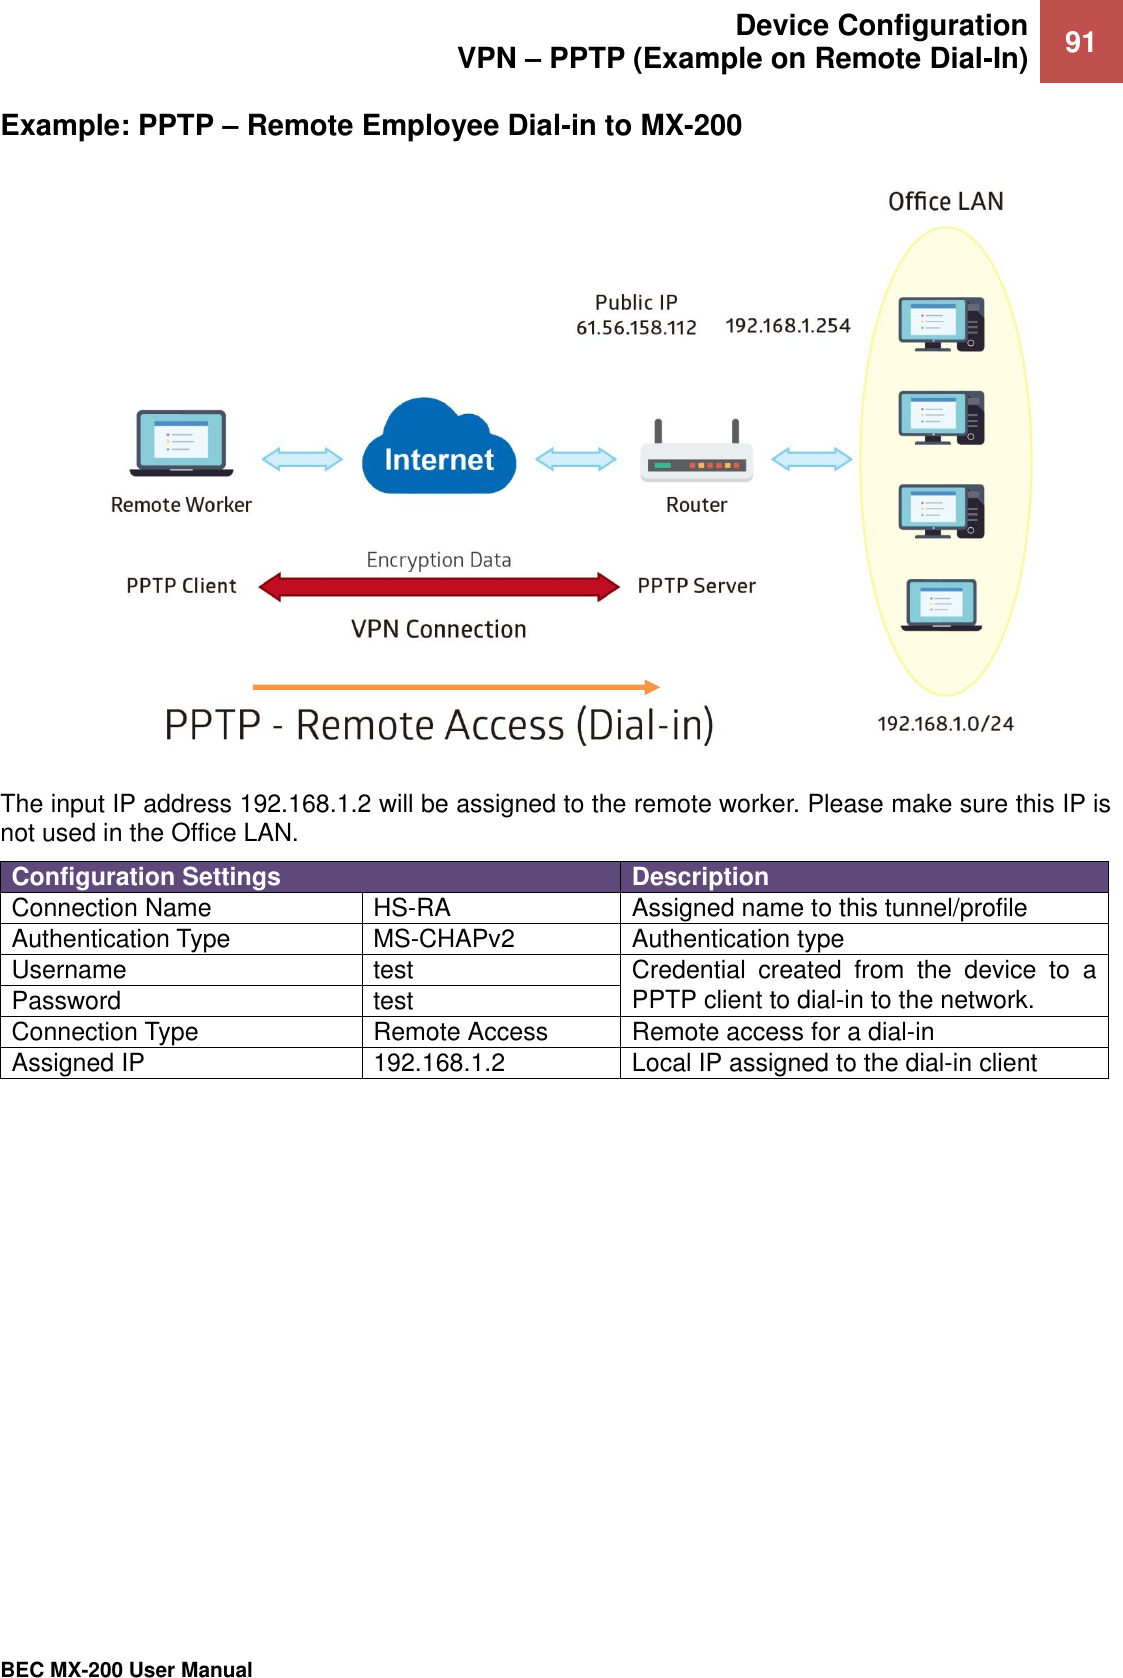  Device Configuration VPN – PPTP (Example on Remote Dial-In) 91   BEC MX-200 User Manual  Example: PPTP – Remote Employee Dial-in to MX-200  The input IP address 192.168.1.2 will be assigned to the remote worker. Please make sure this IP is not used in the Office LAN.  Configuration Settings Description Connection Name HS-RA Assigned name to this tunnel/profile Authentication Type MS-CHAPv2 Authentication type Username test Credential  created  from  the  device  to  a PPTP client to dial-in to the network.   Password test Connection Type Remote Access Remote access for a dial-in Assigned IP 192.168.1.2 Local IP assigned to the dial-in client 